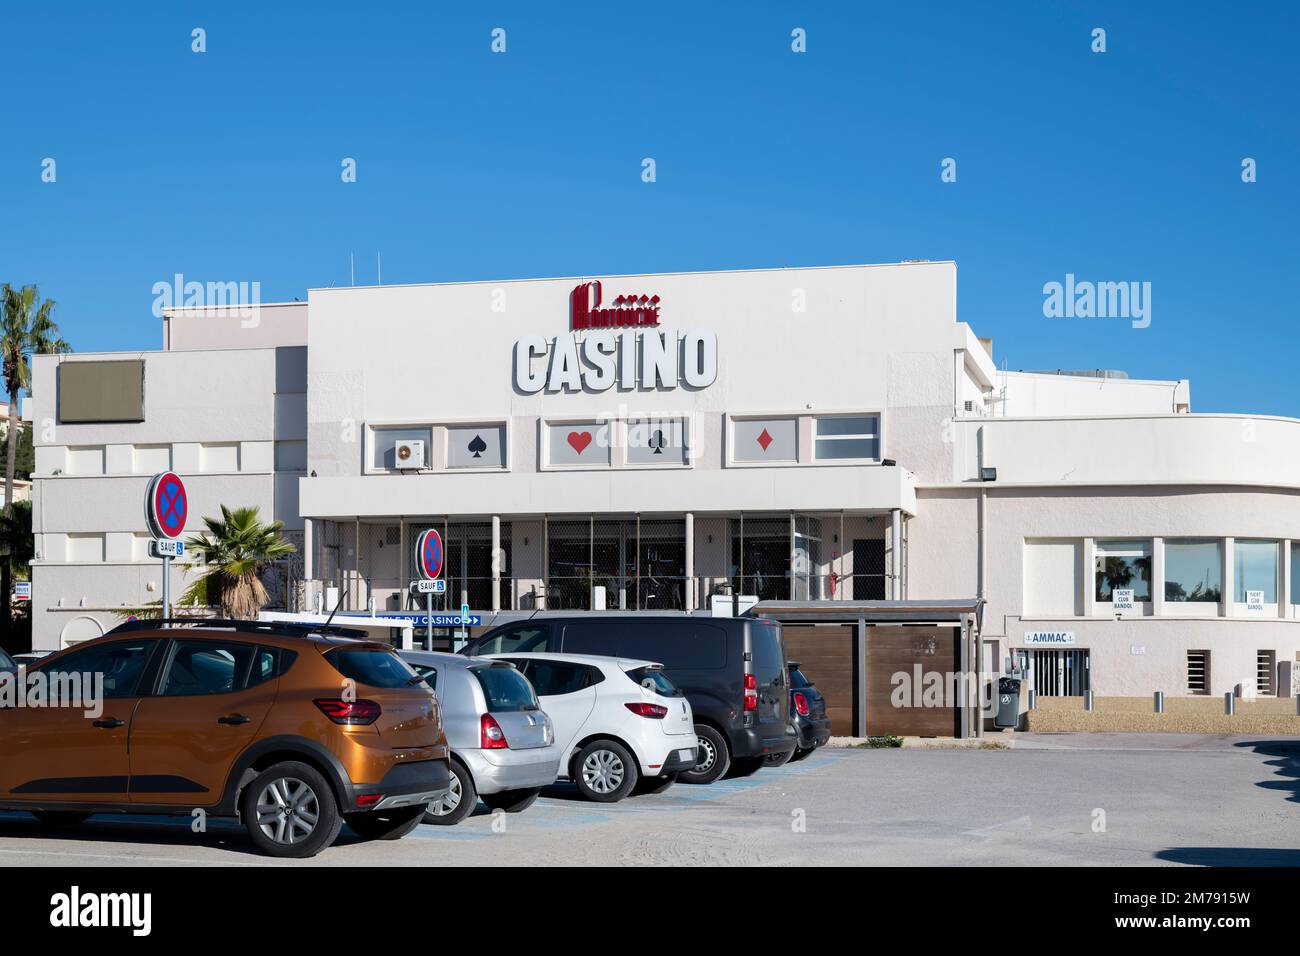 Facade of the Partouche CASINO in Bandol, South of France, Europe Stock Photo